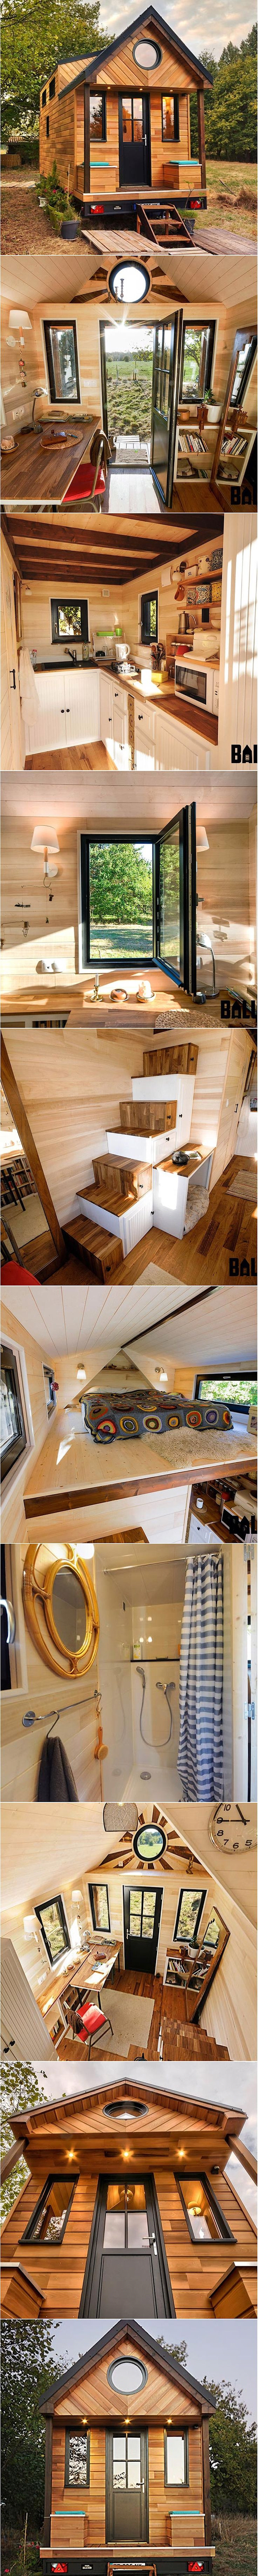 13 Amazing Hardwood Floor Refinishing Eau Claire Wi 2024 free download hardwood floor refinishing eau claire wi of 50 best tiny house images by camille bertin on pinterest small with regard to the avonlea tiny house tinyhousebaluchon article found over tnylvng 